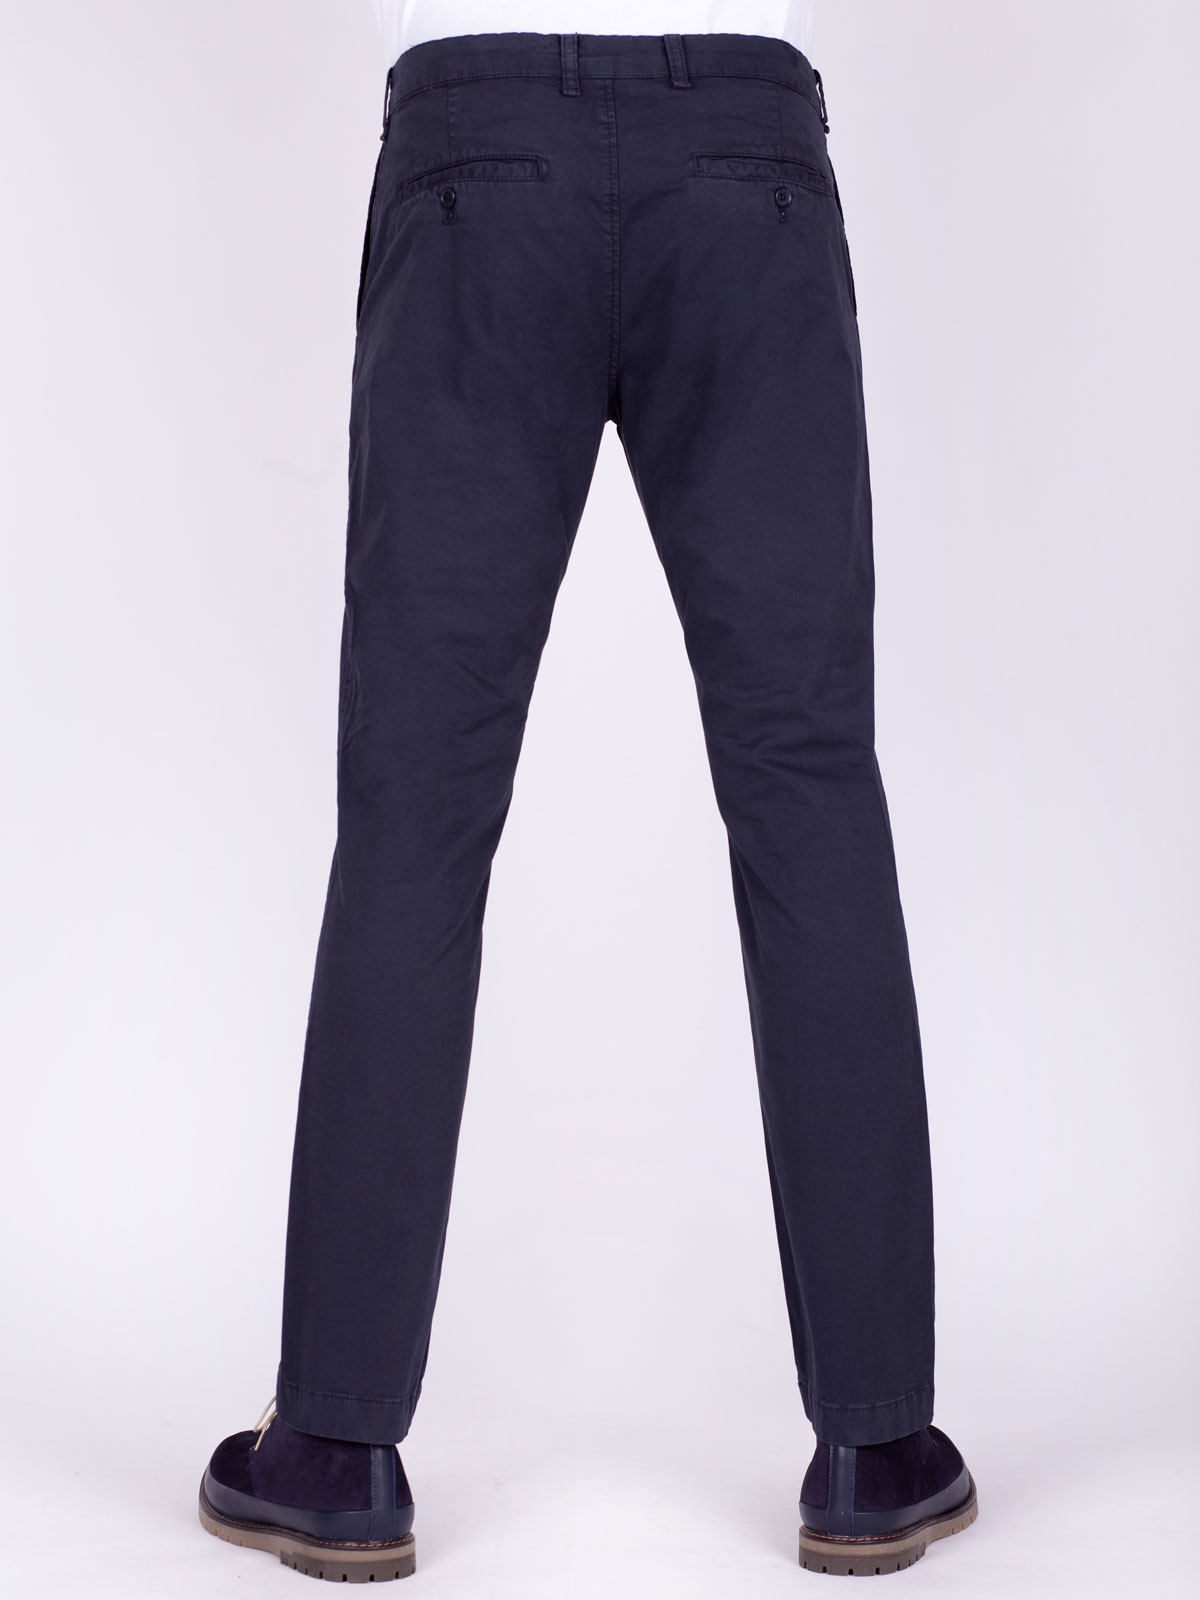 Black trousers with a fitted silhouette - 60277 € 49.49 img3